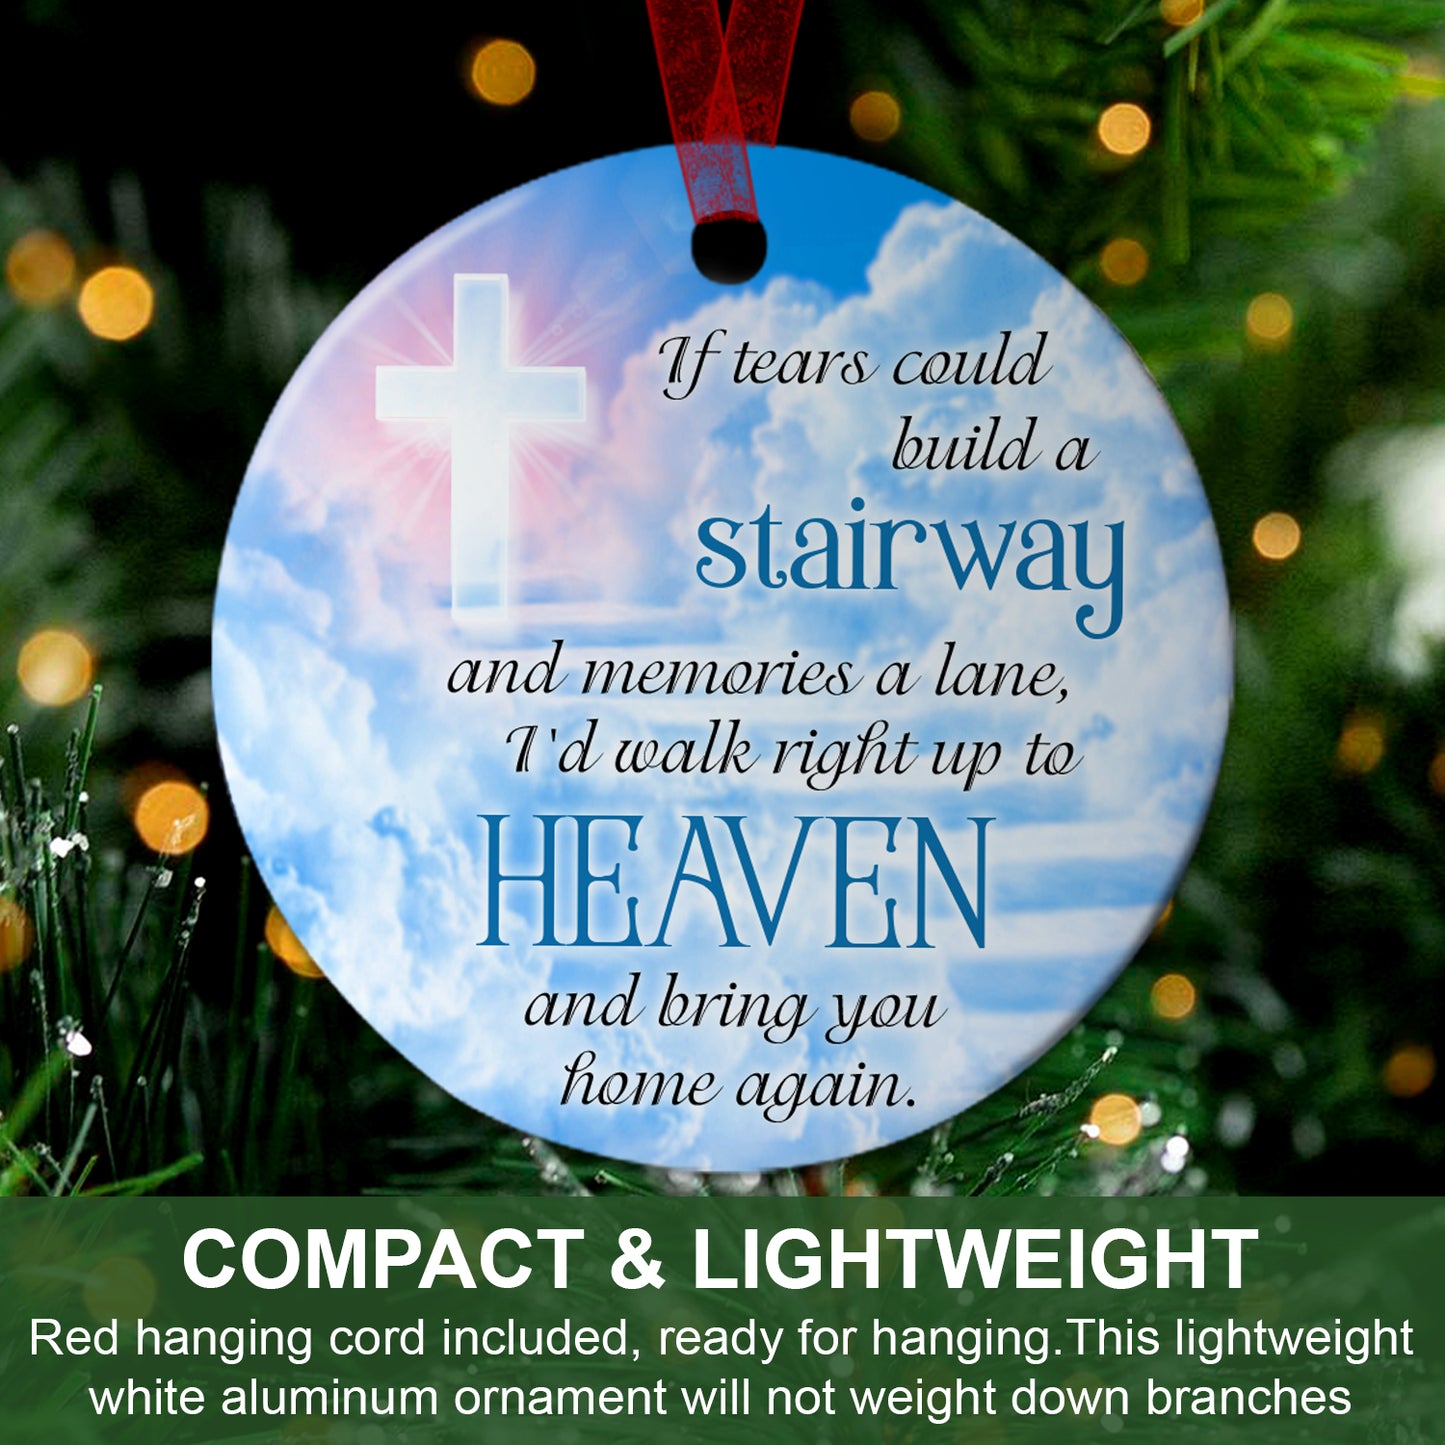 Keepsake Ornament If Tears Could Build A Stairway And Memories A Lane Ornament Memorial Gift For Loss Of Loved Ones - Aluminum Metal Ornament